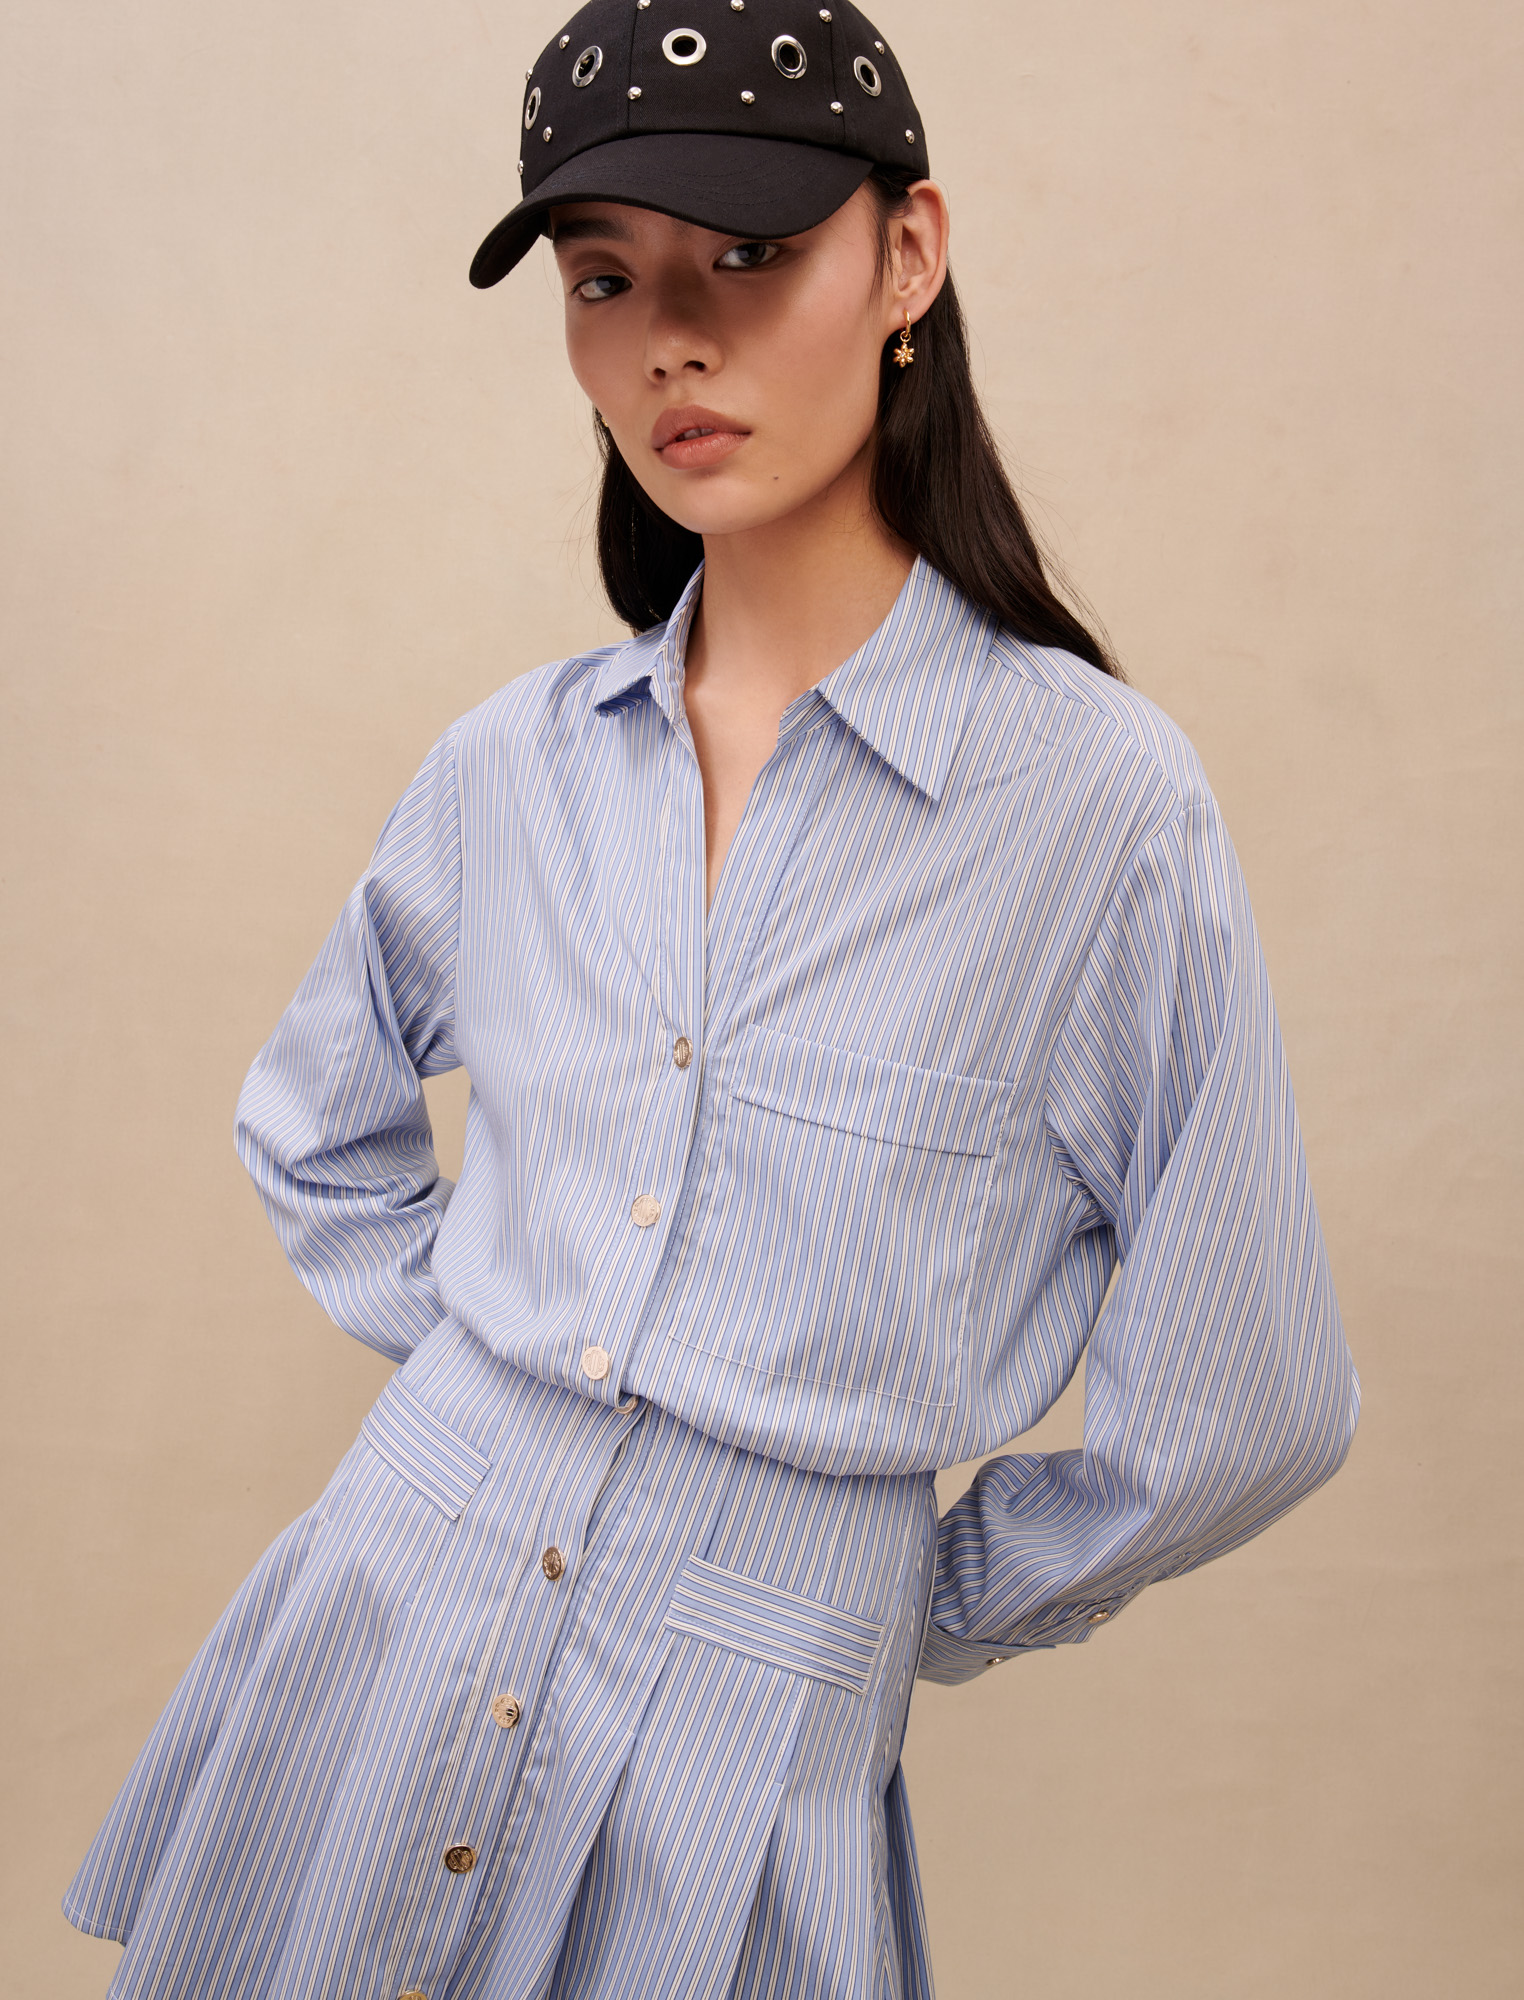 Maje Woman's cotton, Striped shirt dress for Fall/Winter, in color Light Blue / Blue